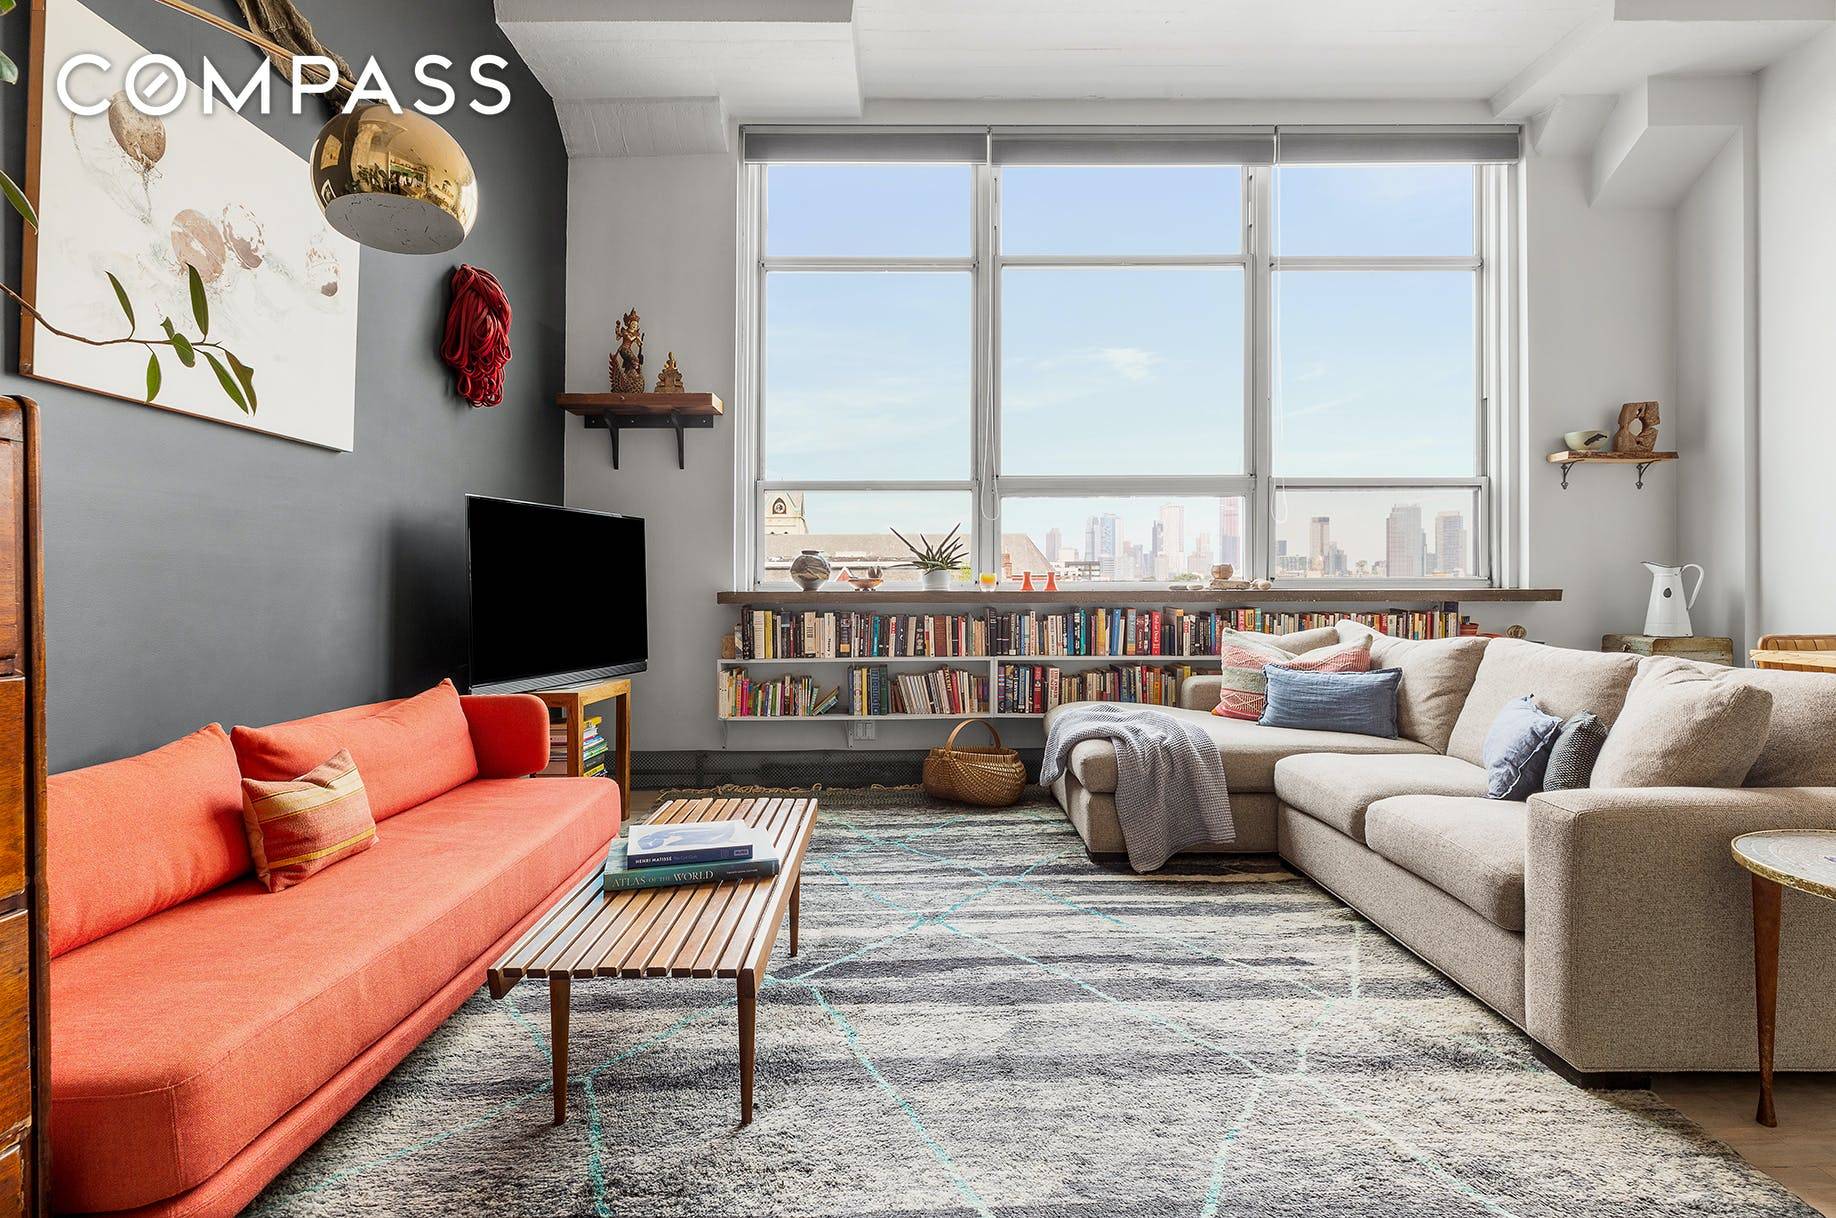 Eclectic Design and Extraordinary Views, this two bedroom, one bathroom loft is the epitome of Brooklyn cool.